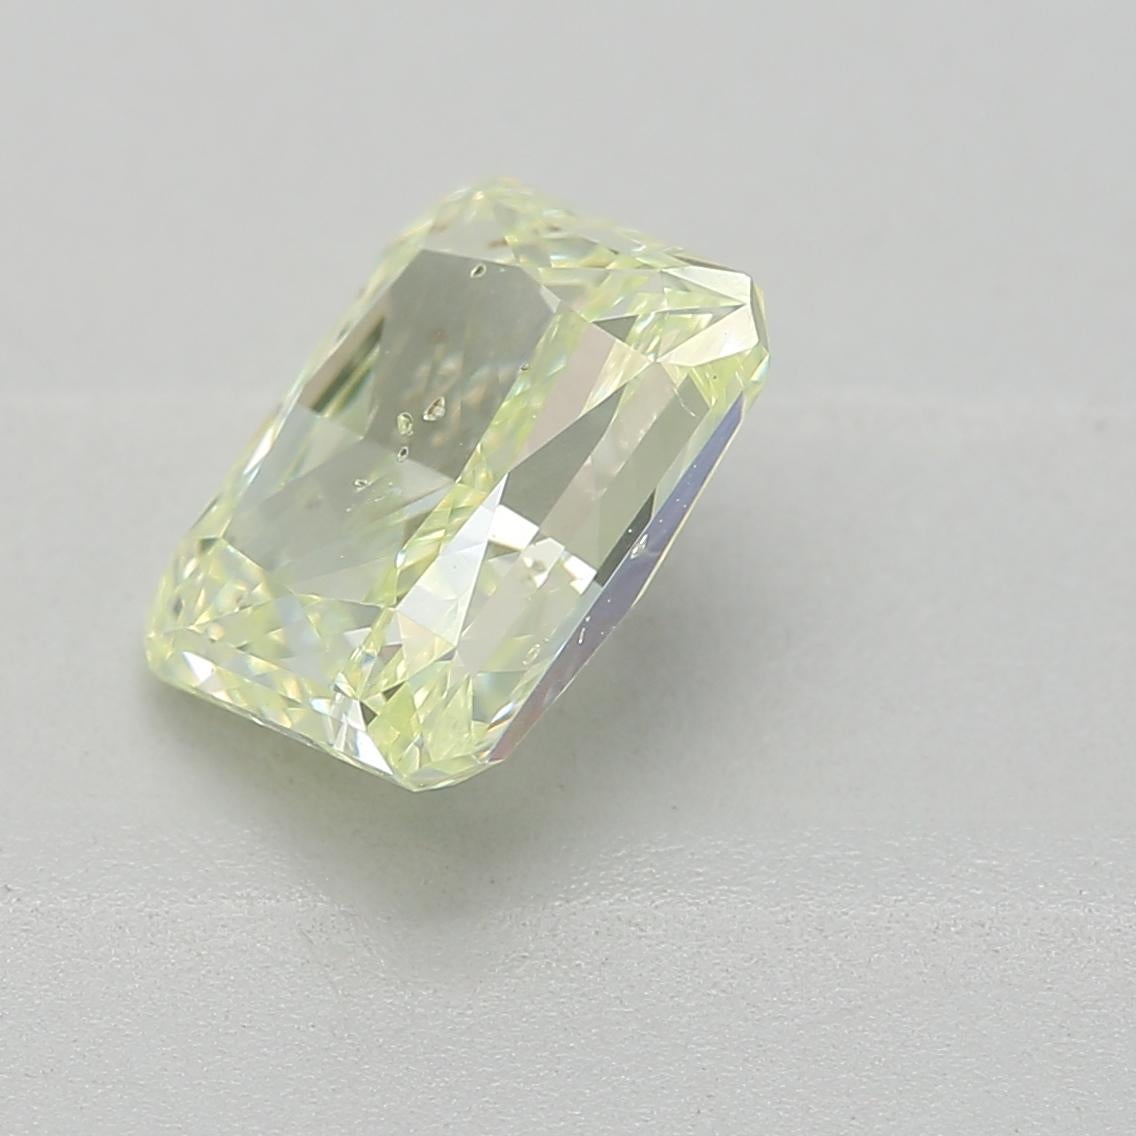 *100% NATURAL FANCY COLOUR DIAMOND*

✪ Diamond Details ✪

➛ Shape: Radiant
➛ Colour Grade: Fancy Yellow Green 
➛ Carat: 1.11
➛ Clarity: SI2
➛ GIA Certified 

^FEATURES OF THE DIAMOND^












Also, our GIA certified diamond is a diamond that has